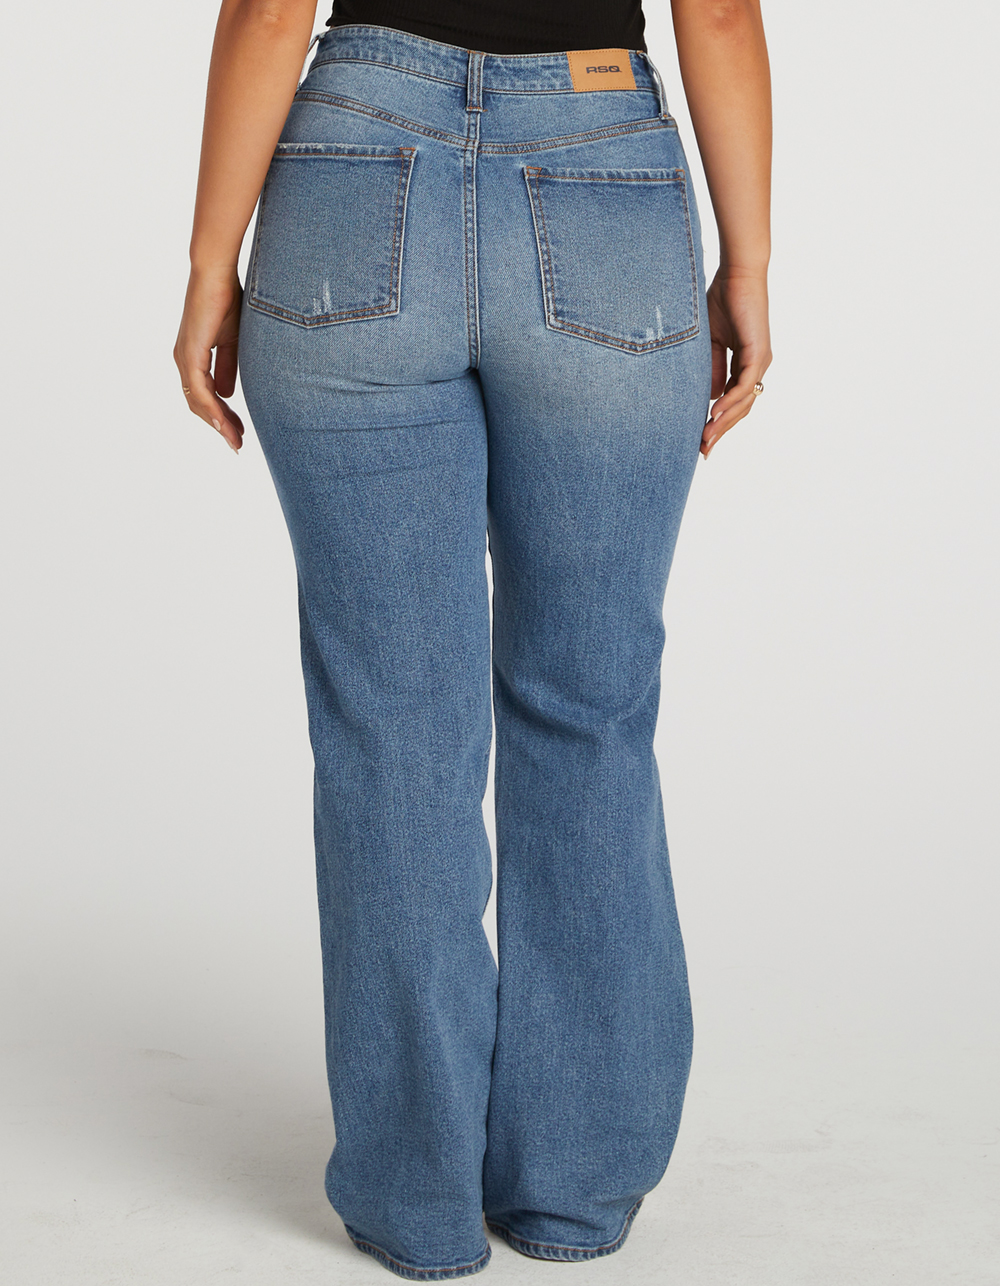 RSQ Womens High Rise Flare Jeans - LIGHT WASH, Tillys